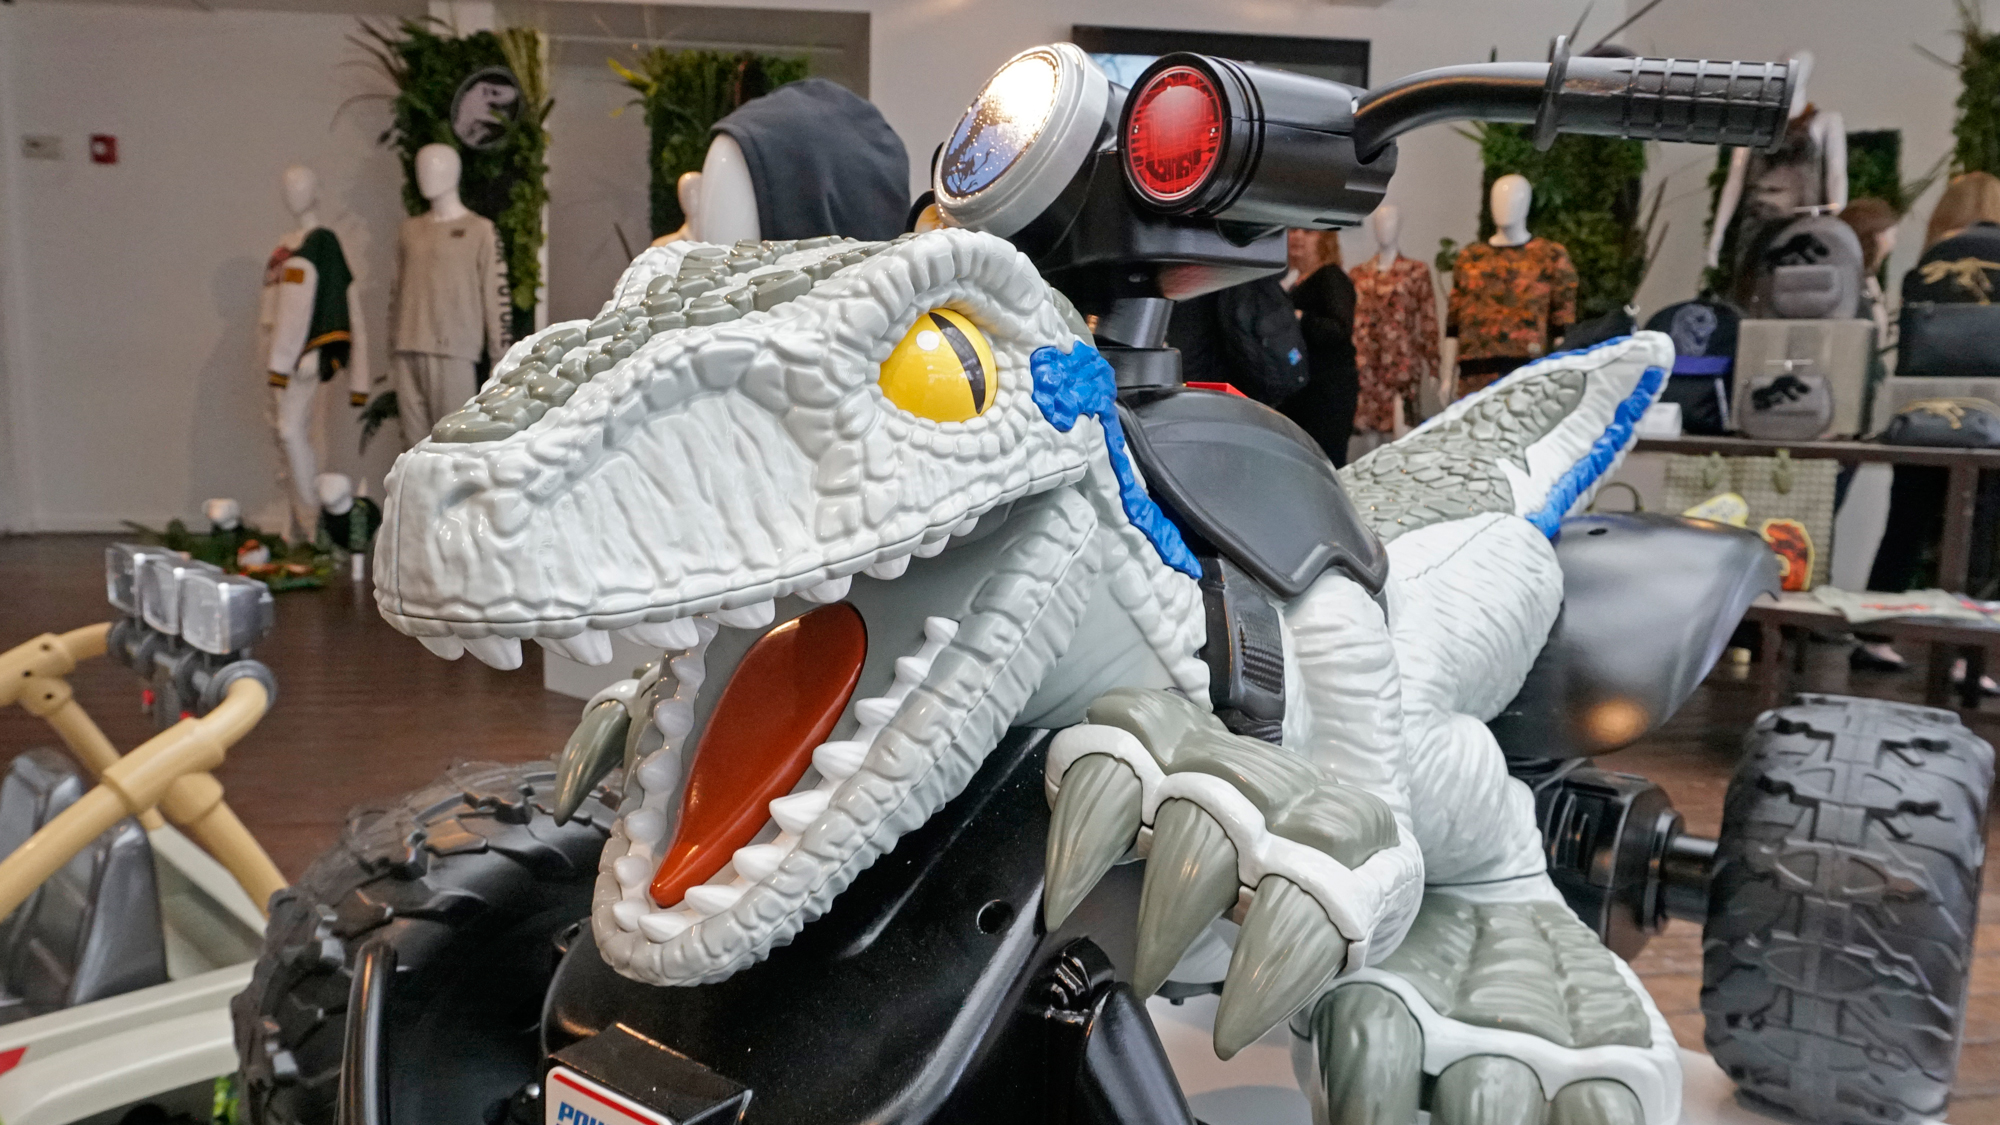 Your Kid Can Now Live Out My Dino-Riding Fantasy